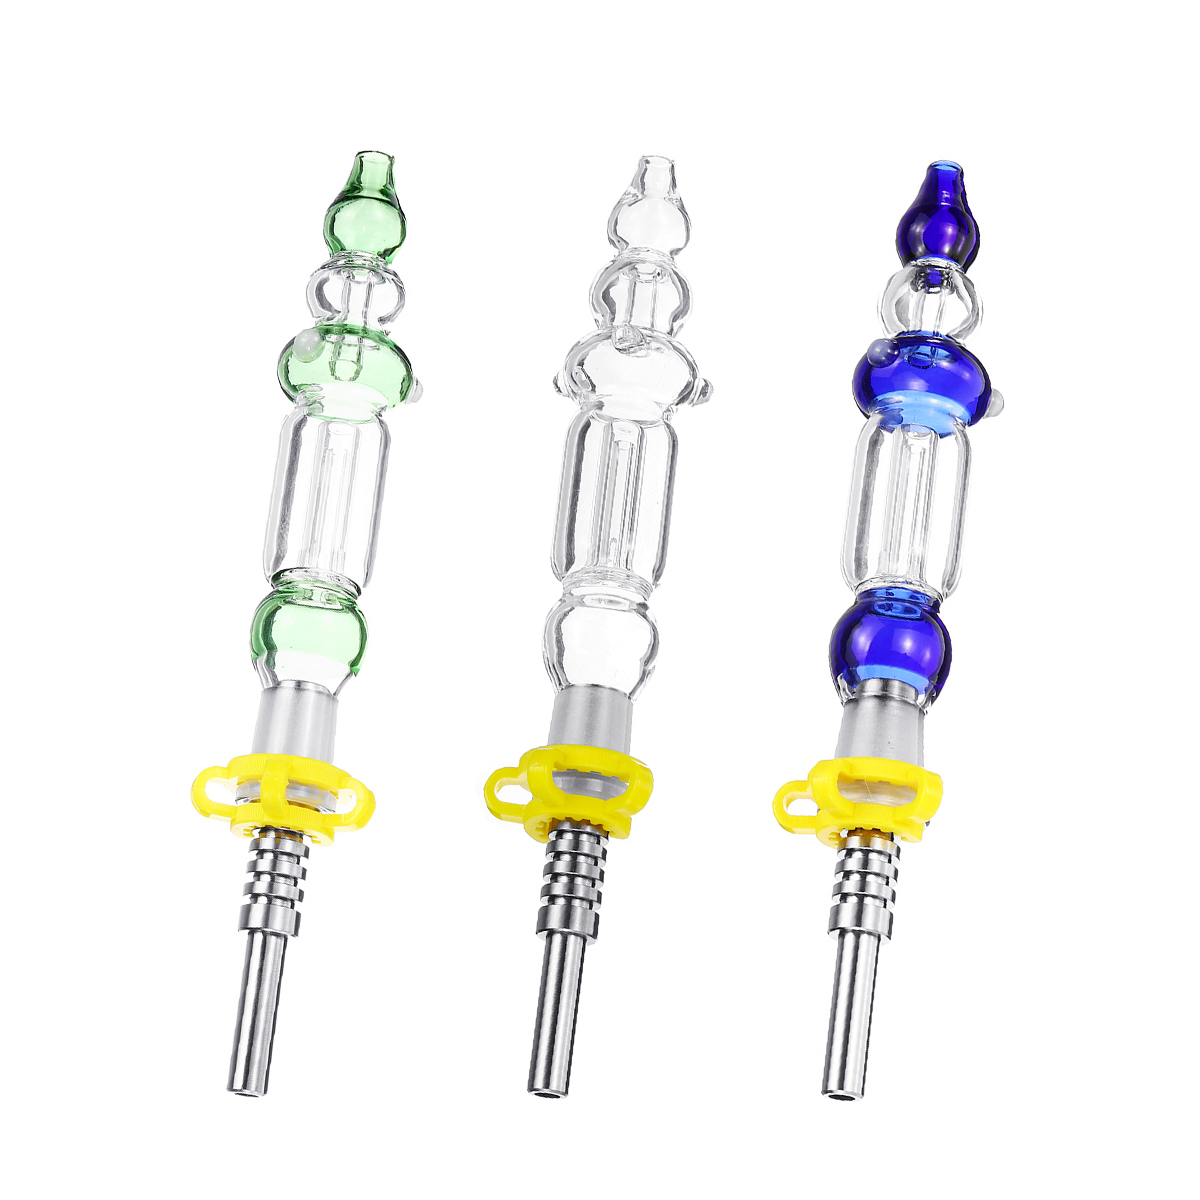 

Fashion White Nectar Collector Full Set Glass Accessories 10mm/14mm Caliber